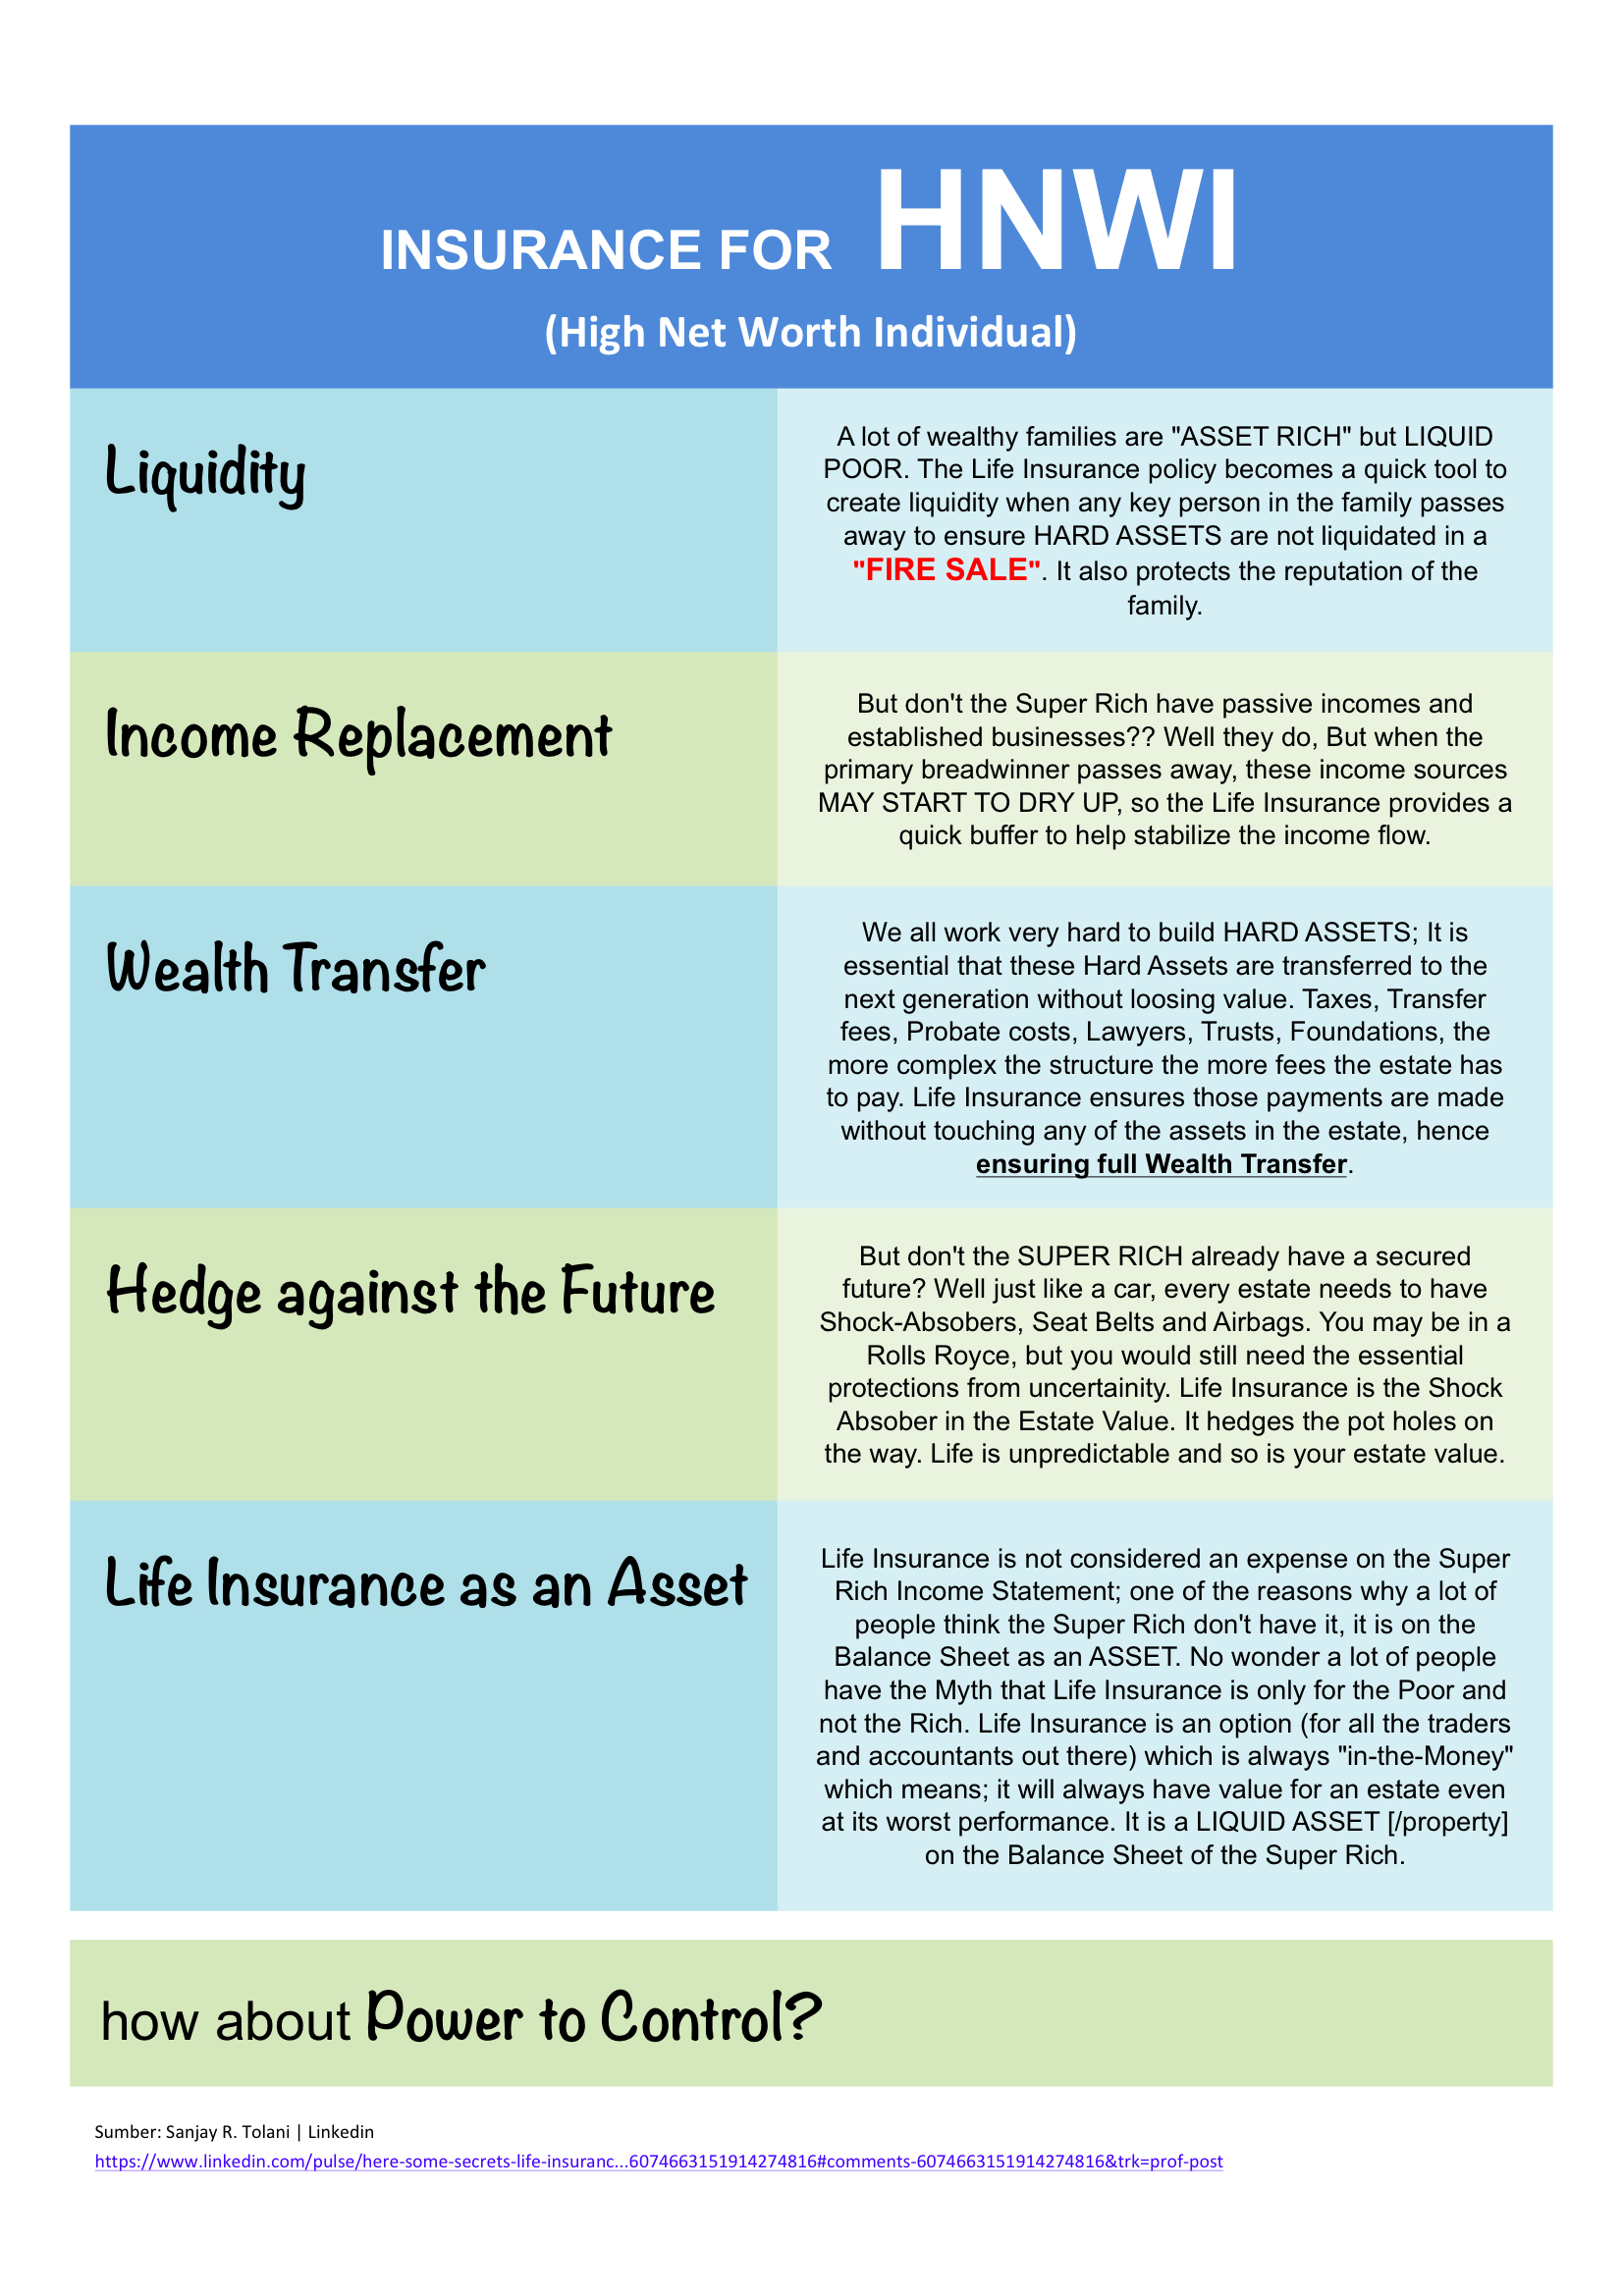 Insurance for High Net Worth Individual